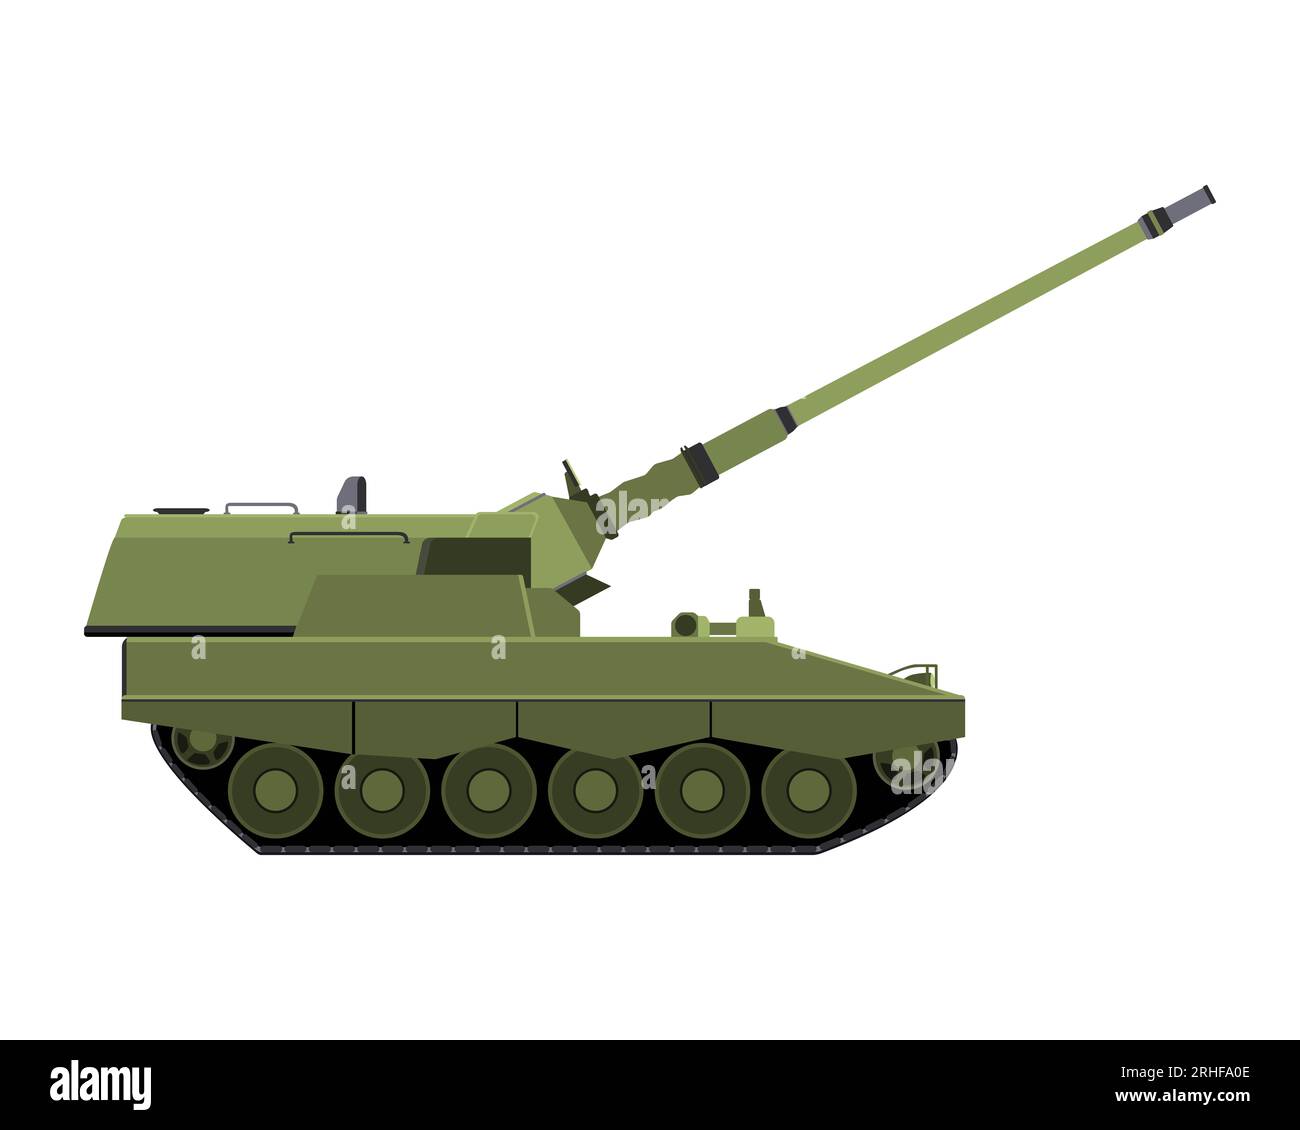 Self-propelled howitzer in flat style. Raised barrel. Military armored vehicle. Colorful illustration isolated on white background. Stock Photo